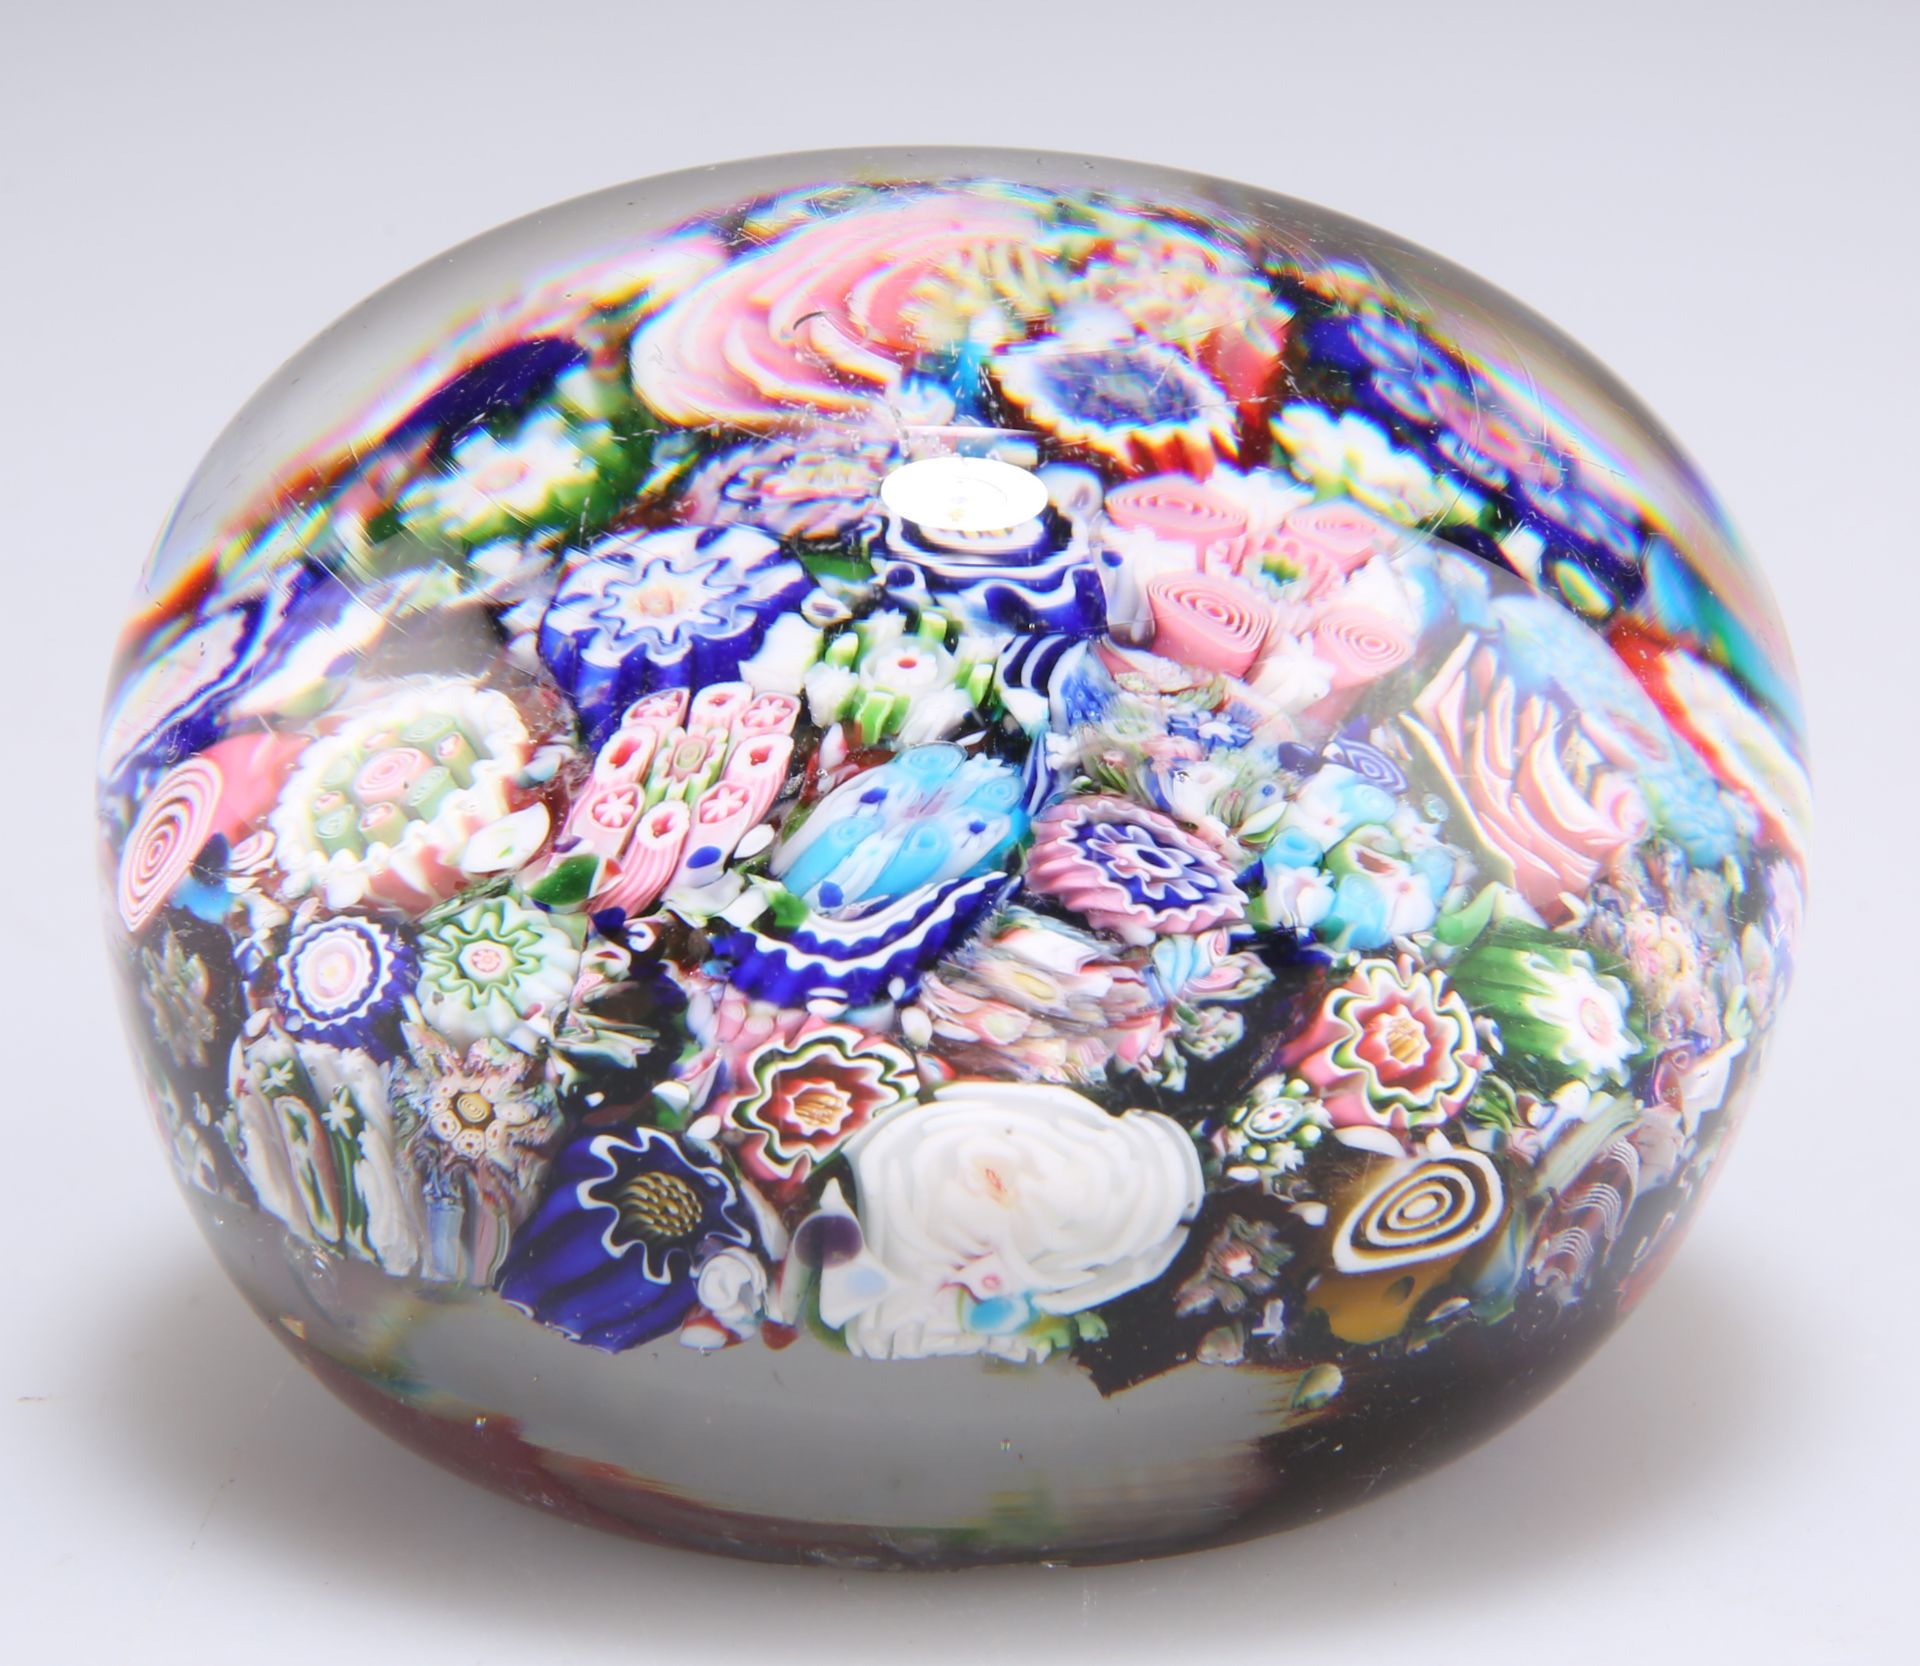 A SIGNED CLICHY CLOSE-PACKED MILLEFIORI PAPERWEIGHT, CIRCA 1850